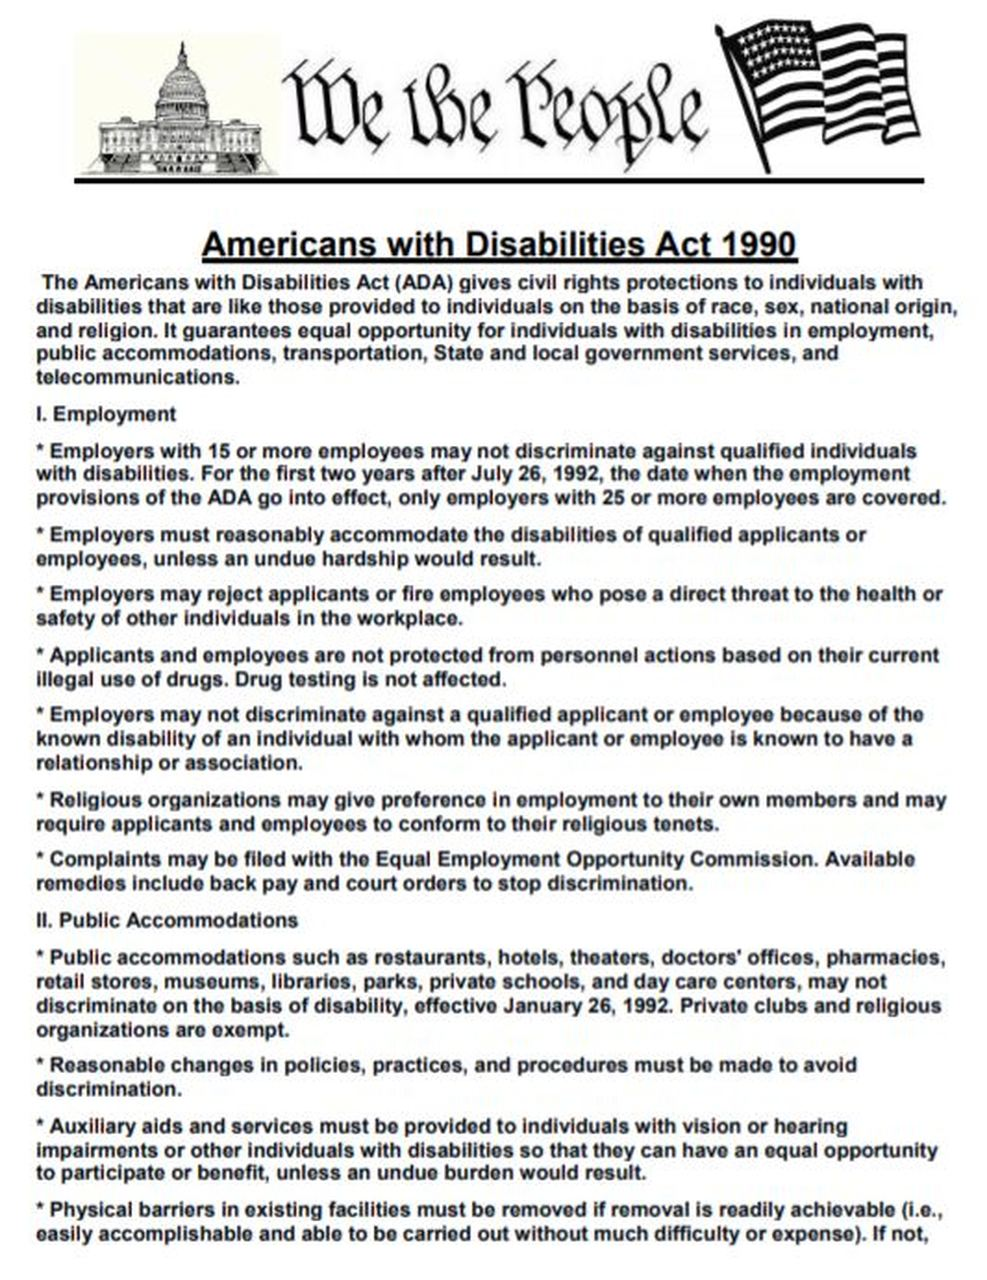 Americans with Disabilities Act Article and Writing Assignment ...